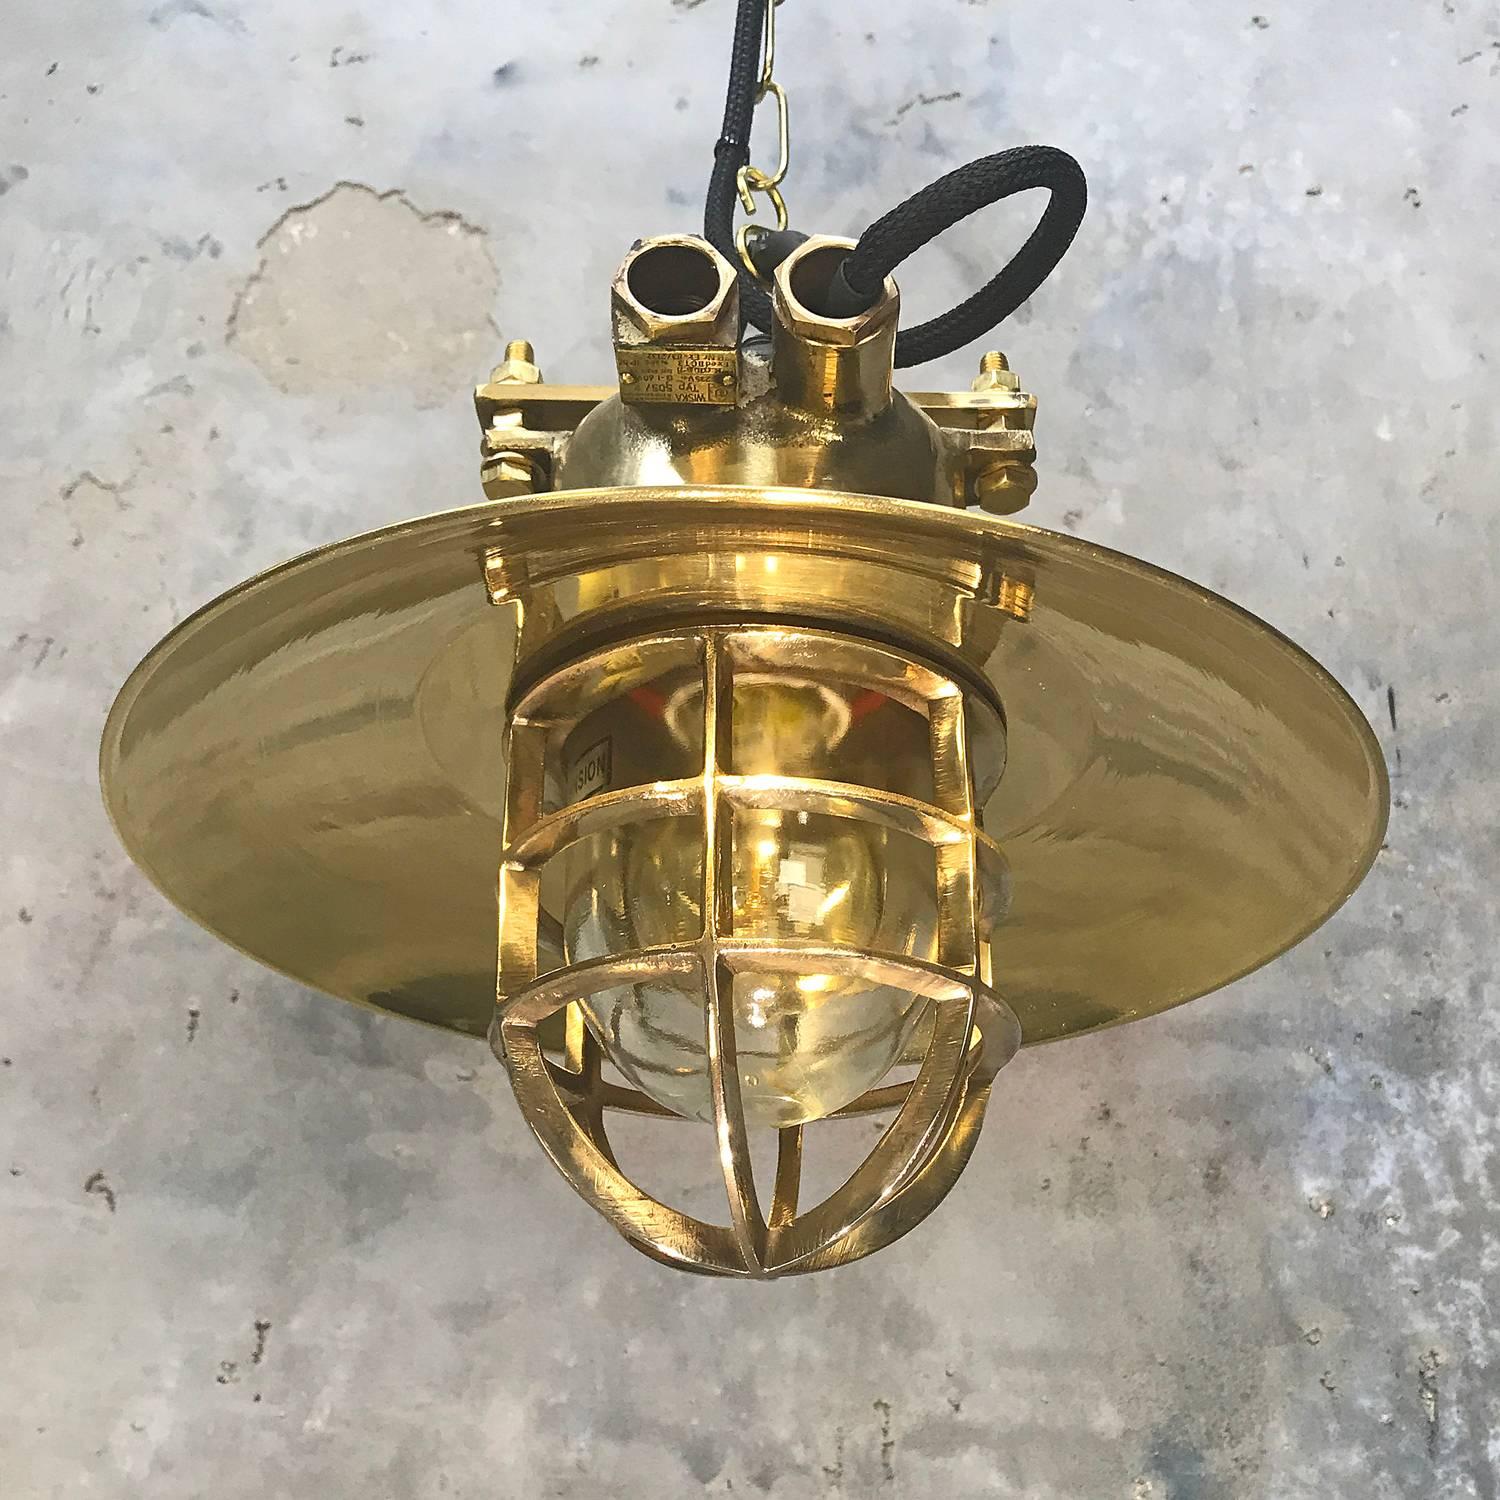 A reclaimed vintage industrial brass and bronze explosion proof ceiling pendant by Wiska.
 
Originally marine lighting fixtures reclaimed from super tankers and cargo ships built in the 1970's.  Professionally restored and converted to pendants by